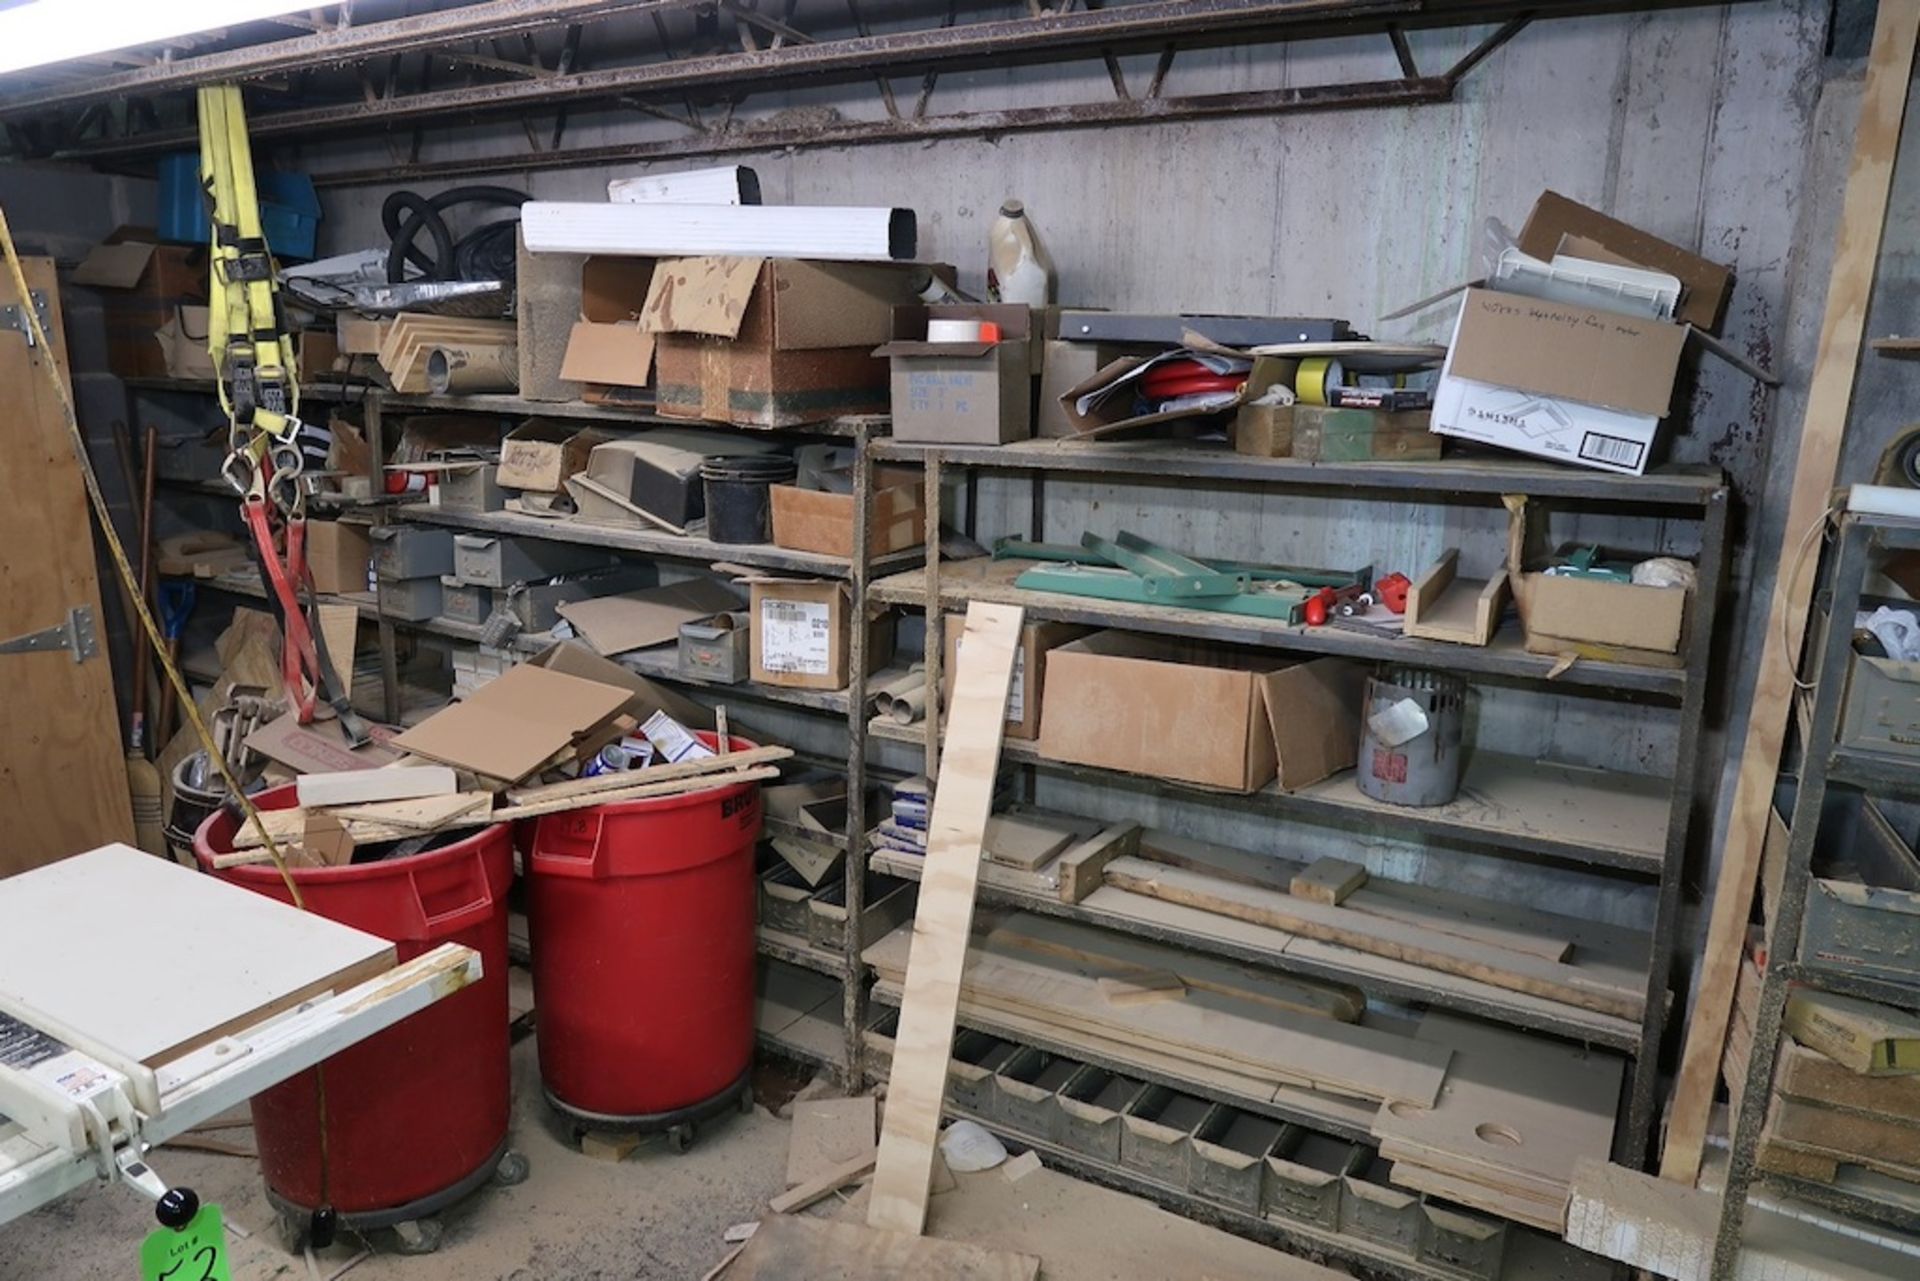 Remaining Contents of Under-Ramp Storage Room, Including Conveyor Parts and Rollers, Etc. - Image 10 of 21